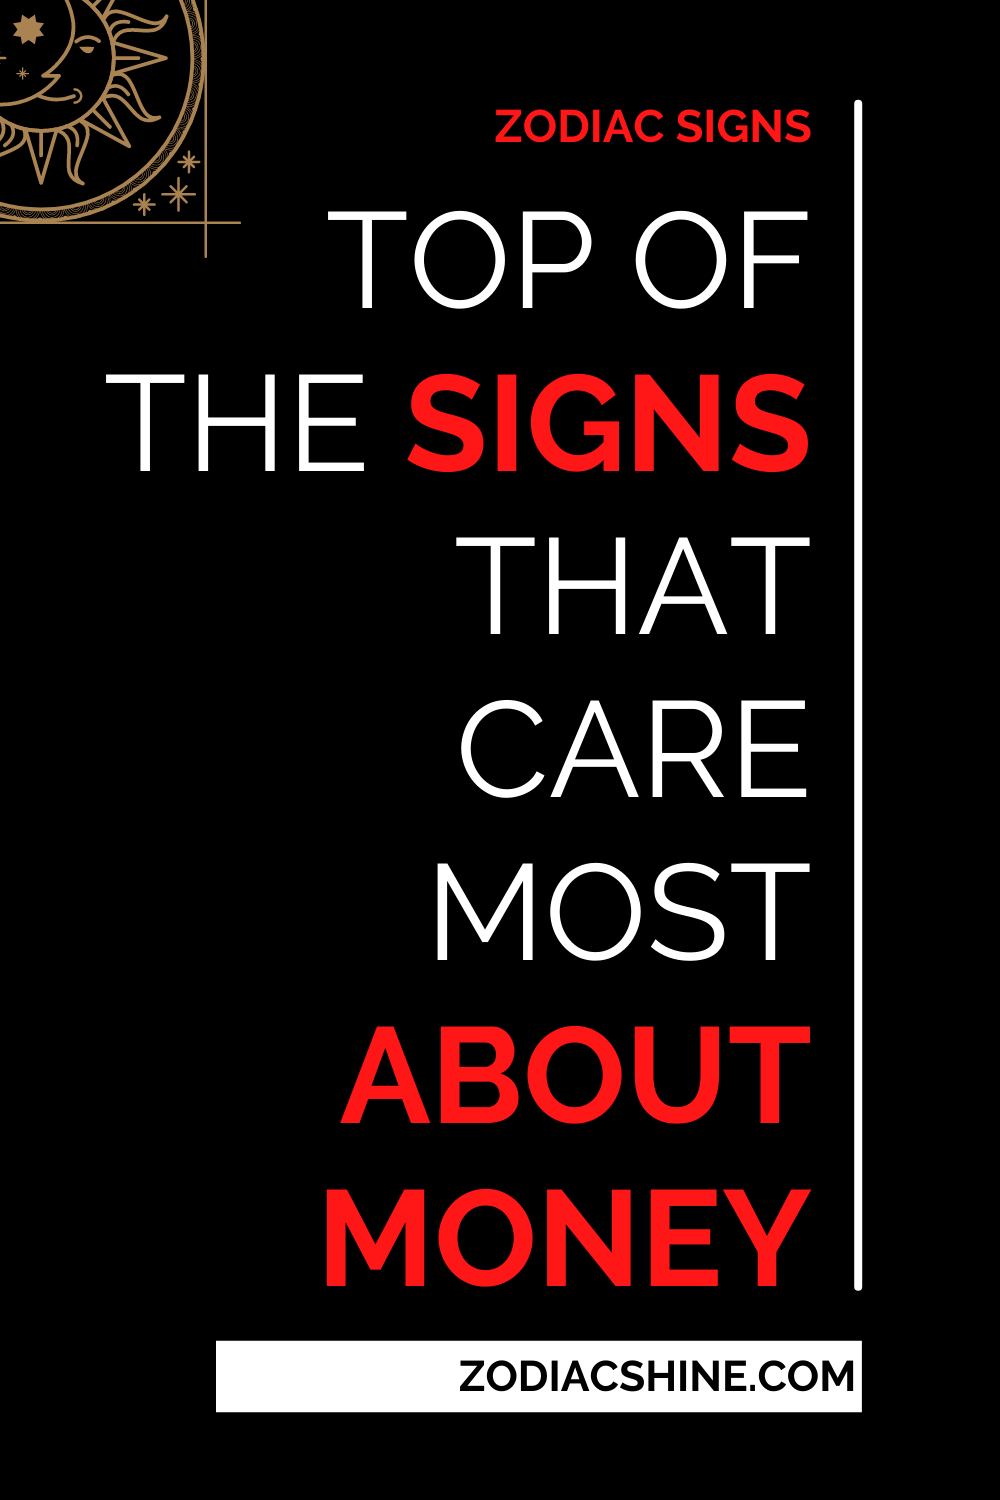 Top Of The Signs That Care Most About Money